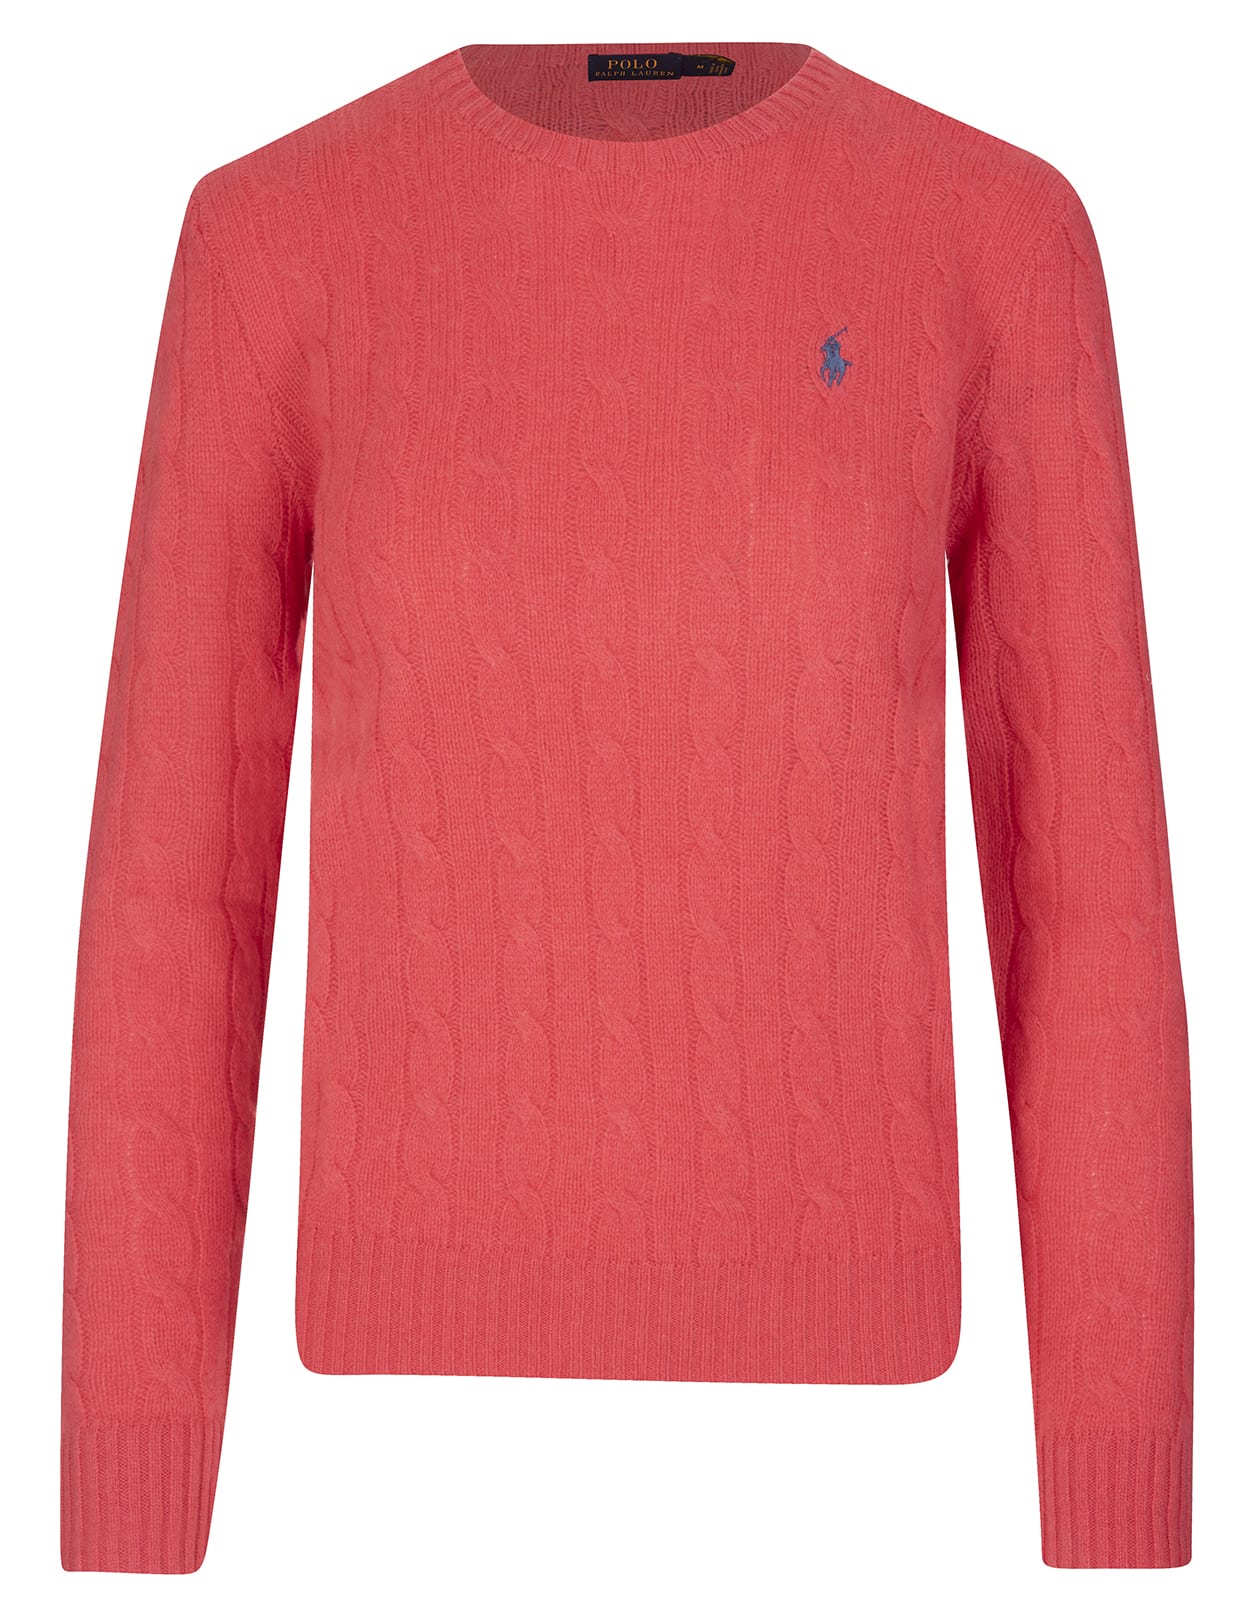 Ralph Lauren Woman Coral Crew-neck Sweater In Braided Wool And Cashmere